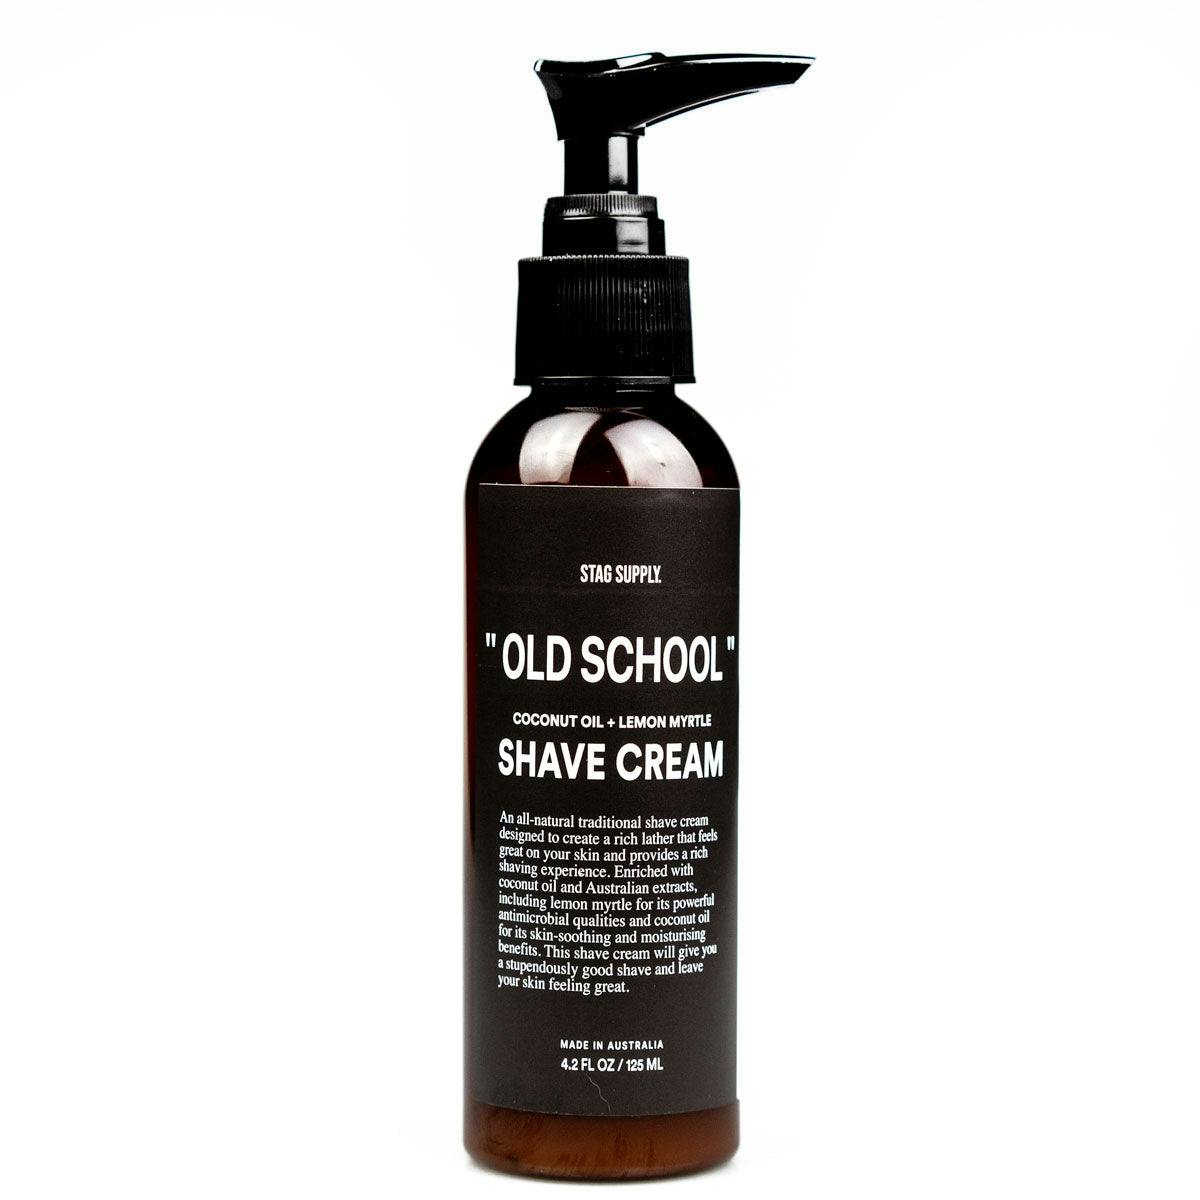 Stag Supply 'Old School' Shave Cream 500ml